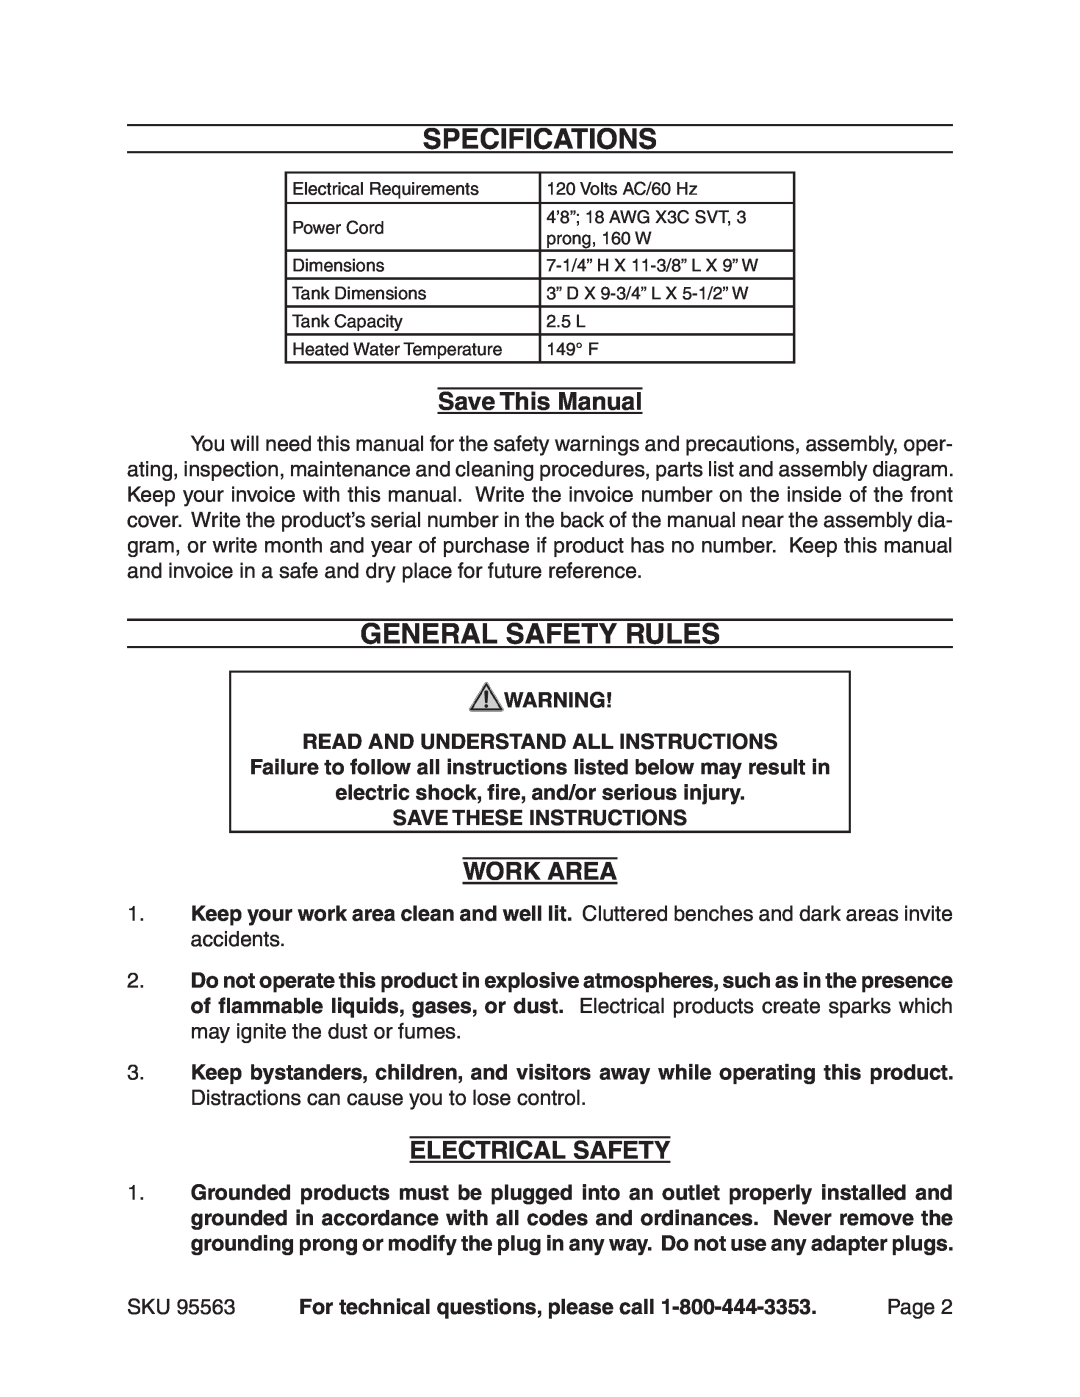 Chicago Electric 95563 manual Specifications, General Safety Rules, Save This Manual, Work Area, Electrical Safety 